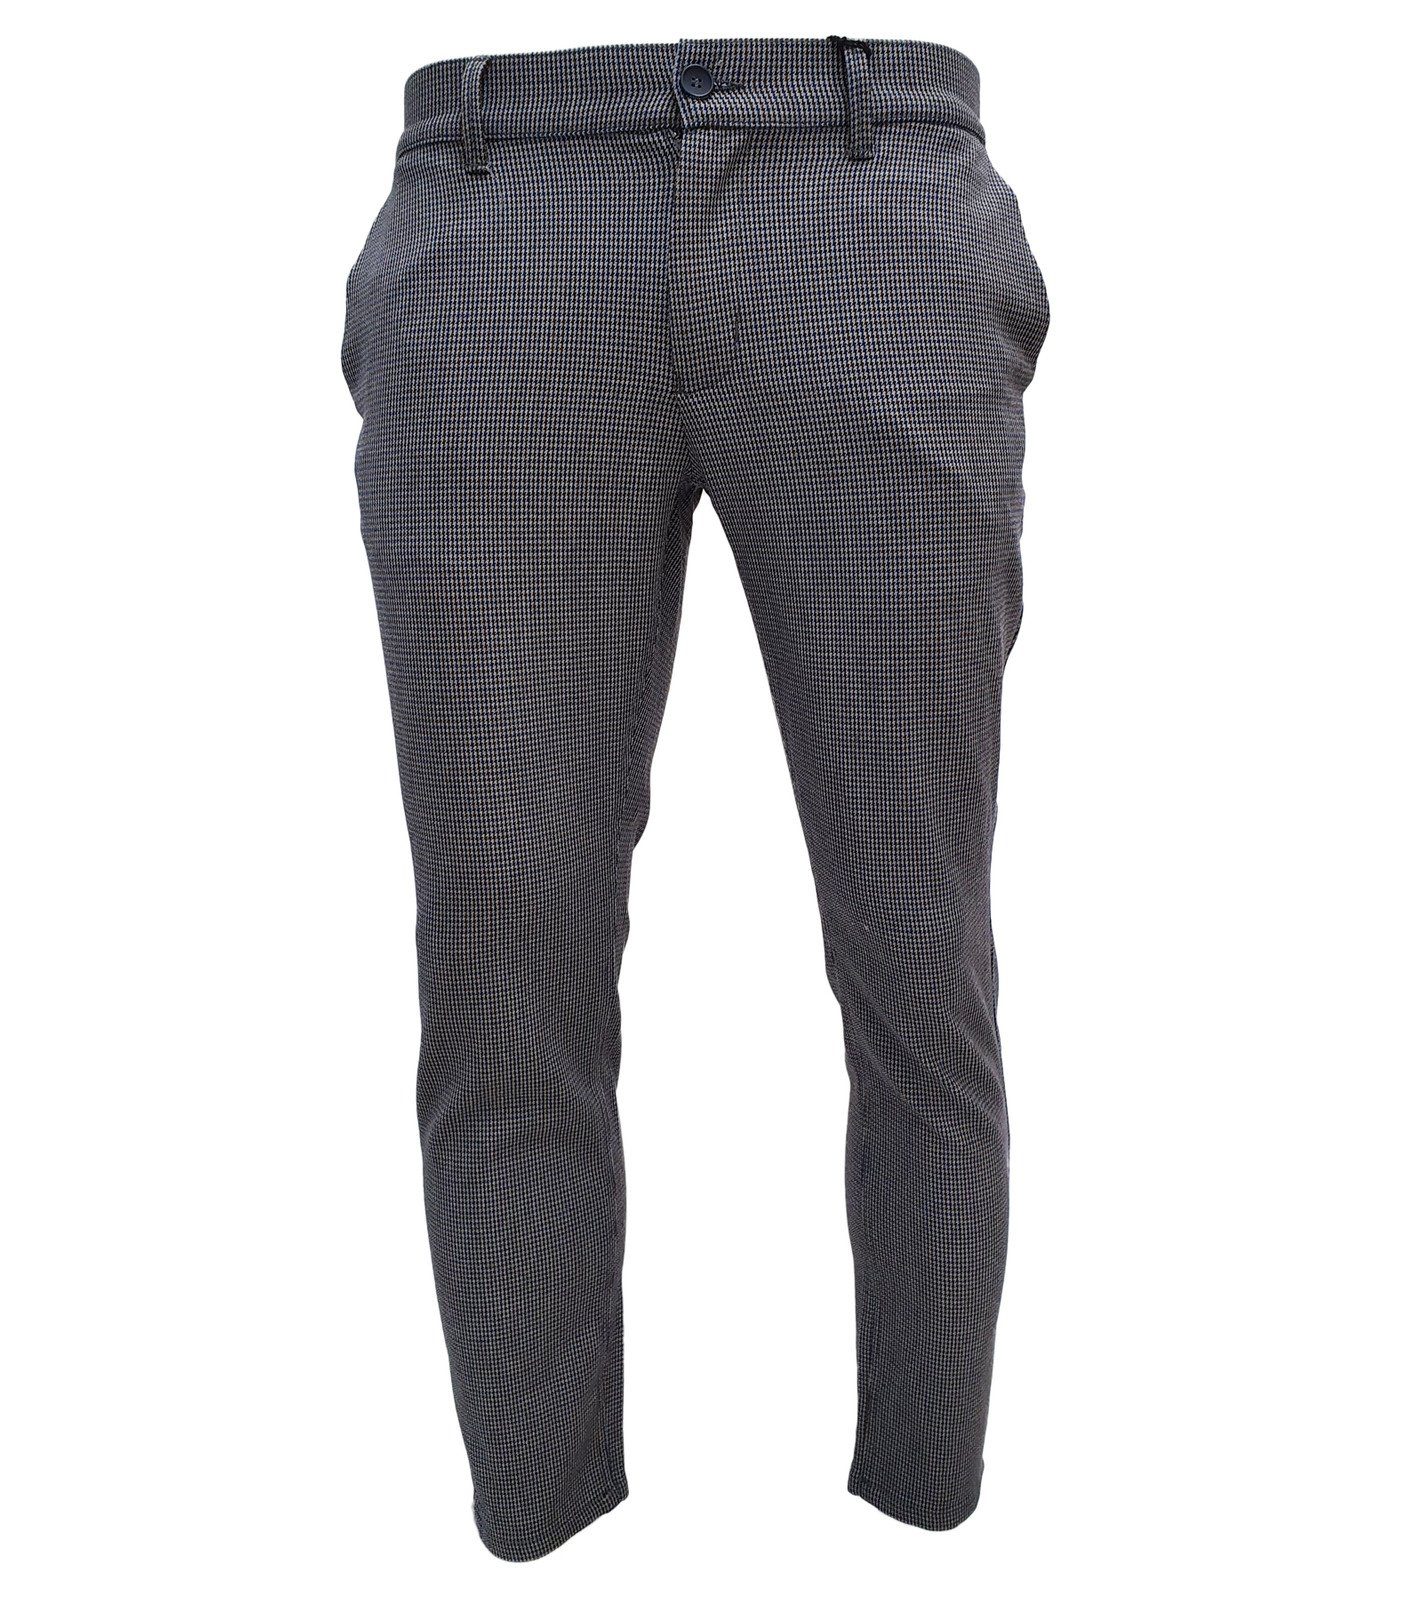 ONLY & SONS Stoffhose »ONLY & SONS Herren Stoff-Hose Chino-Hose Mark Check  Pant Business-Hose Grau« online kaufen | OTTO